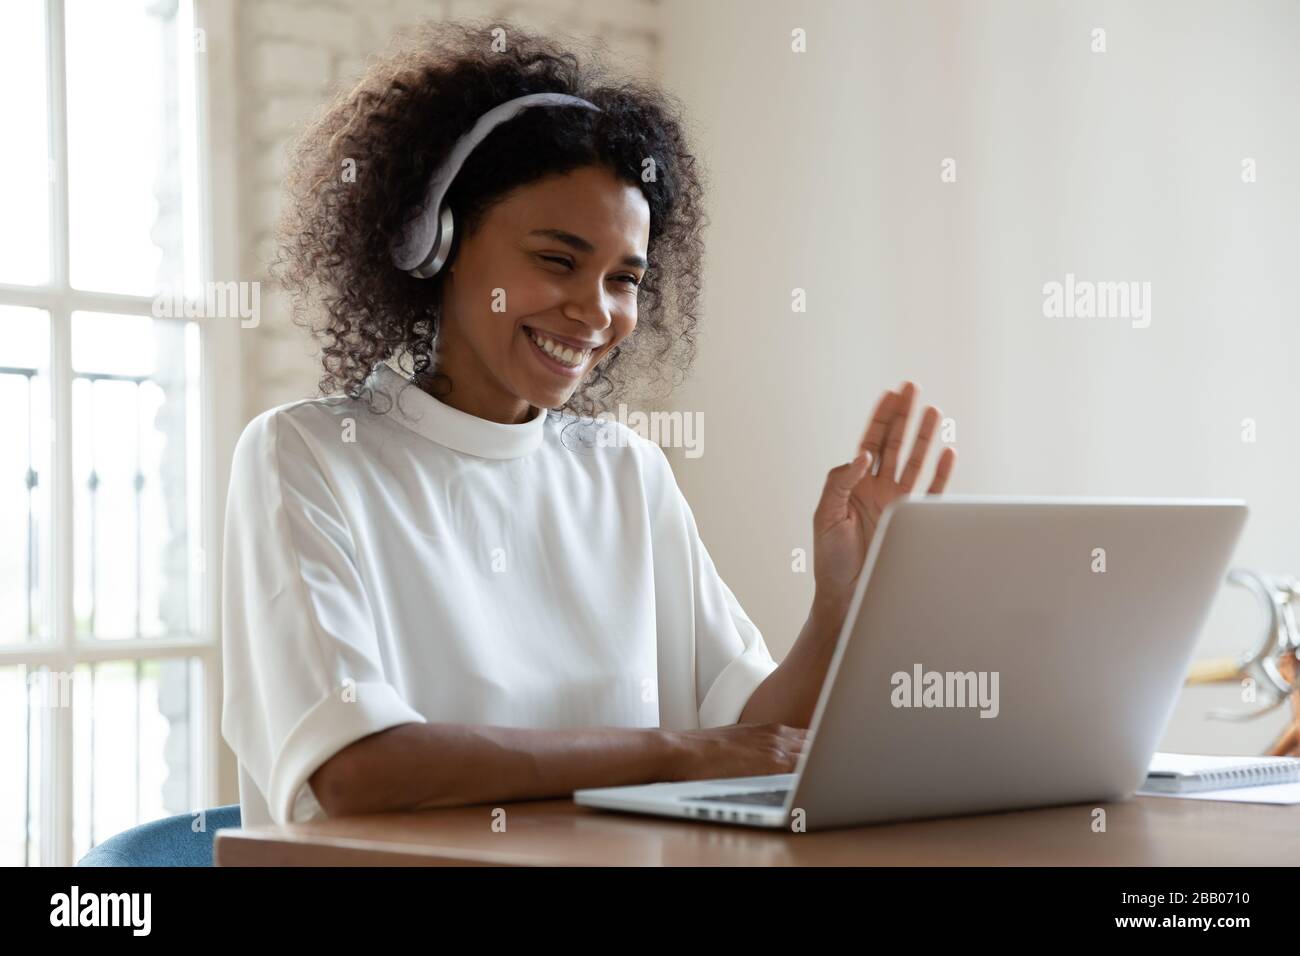 African tutor start online lesson with trainee smiling wave hand Stock Photo